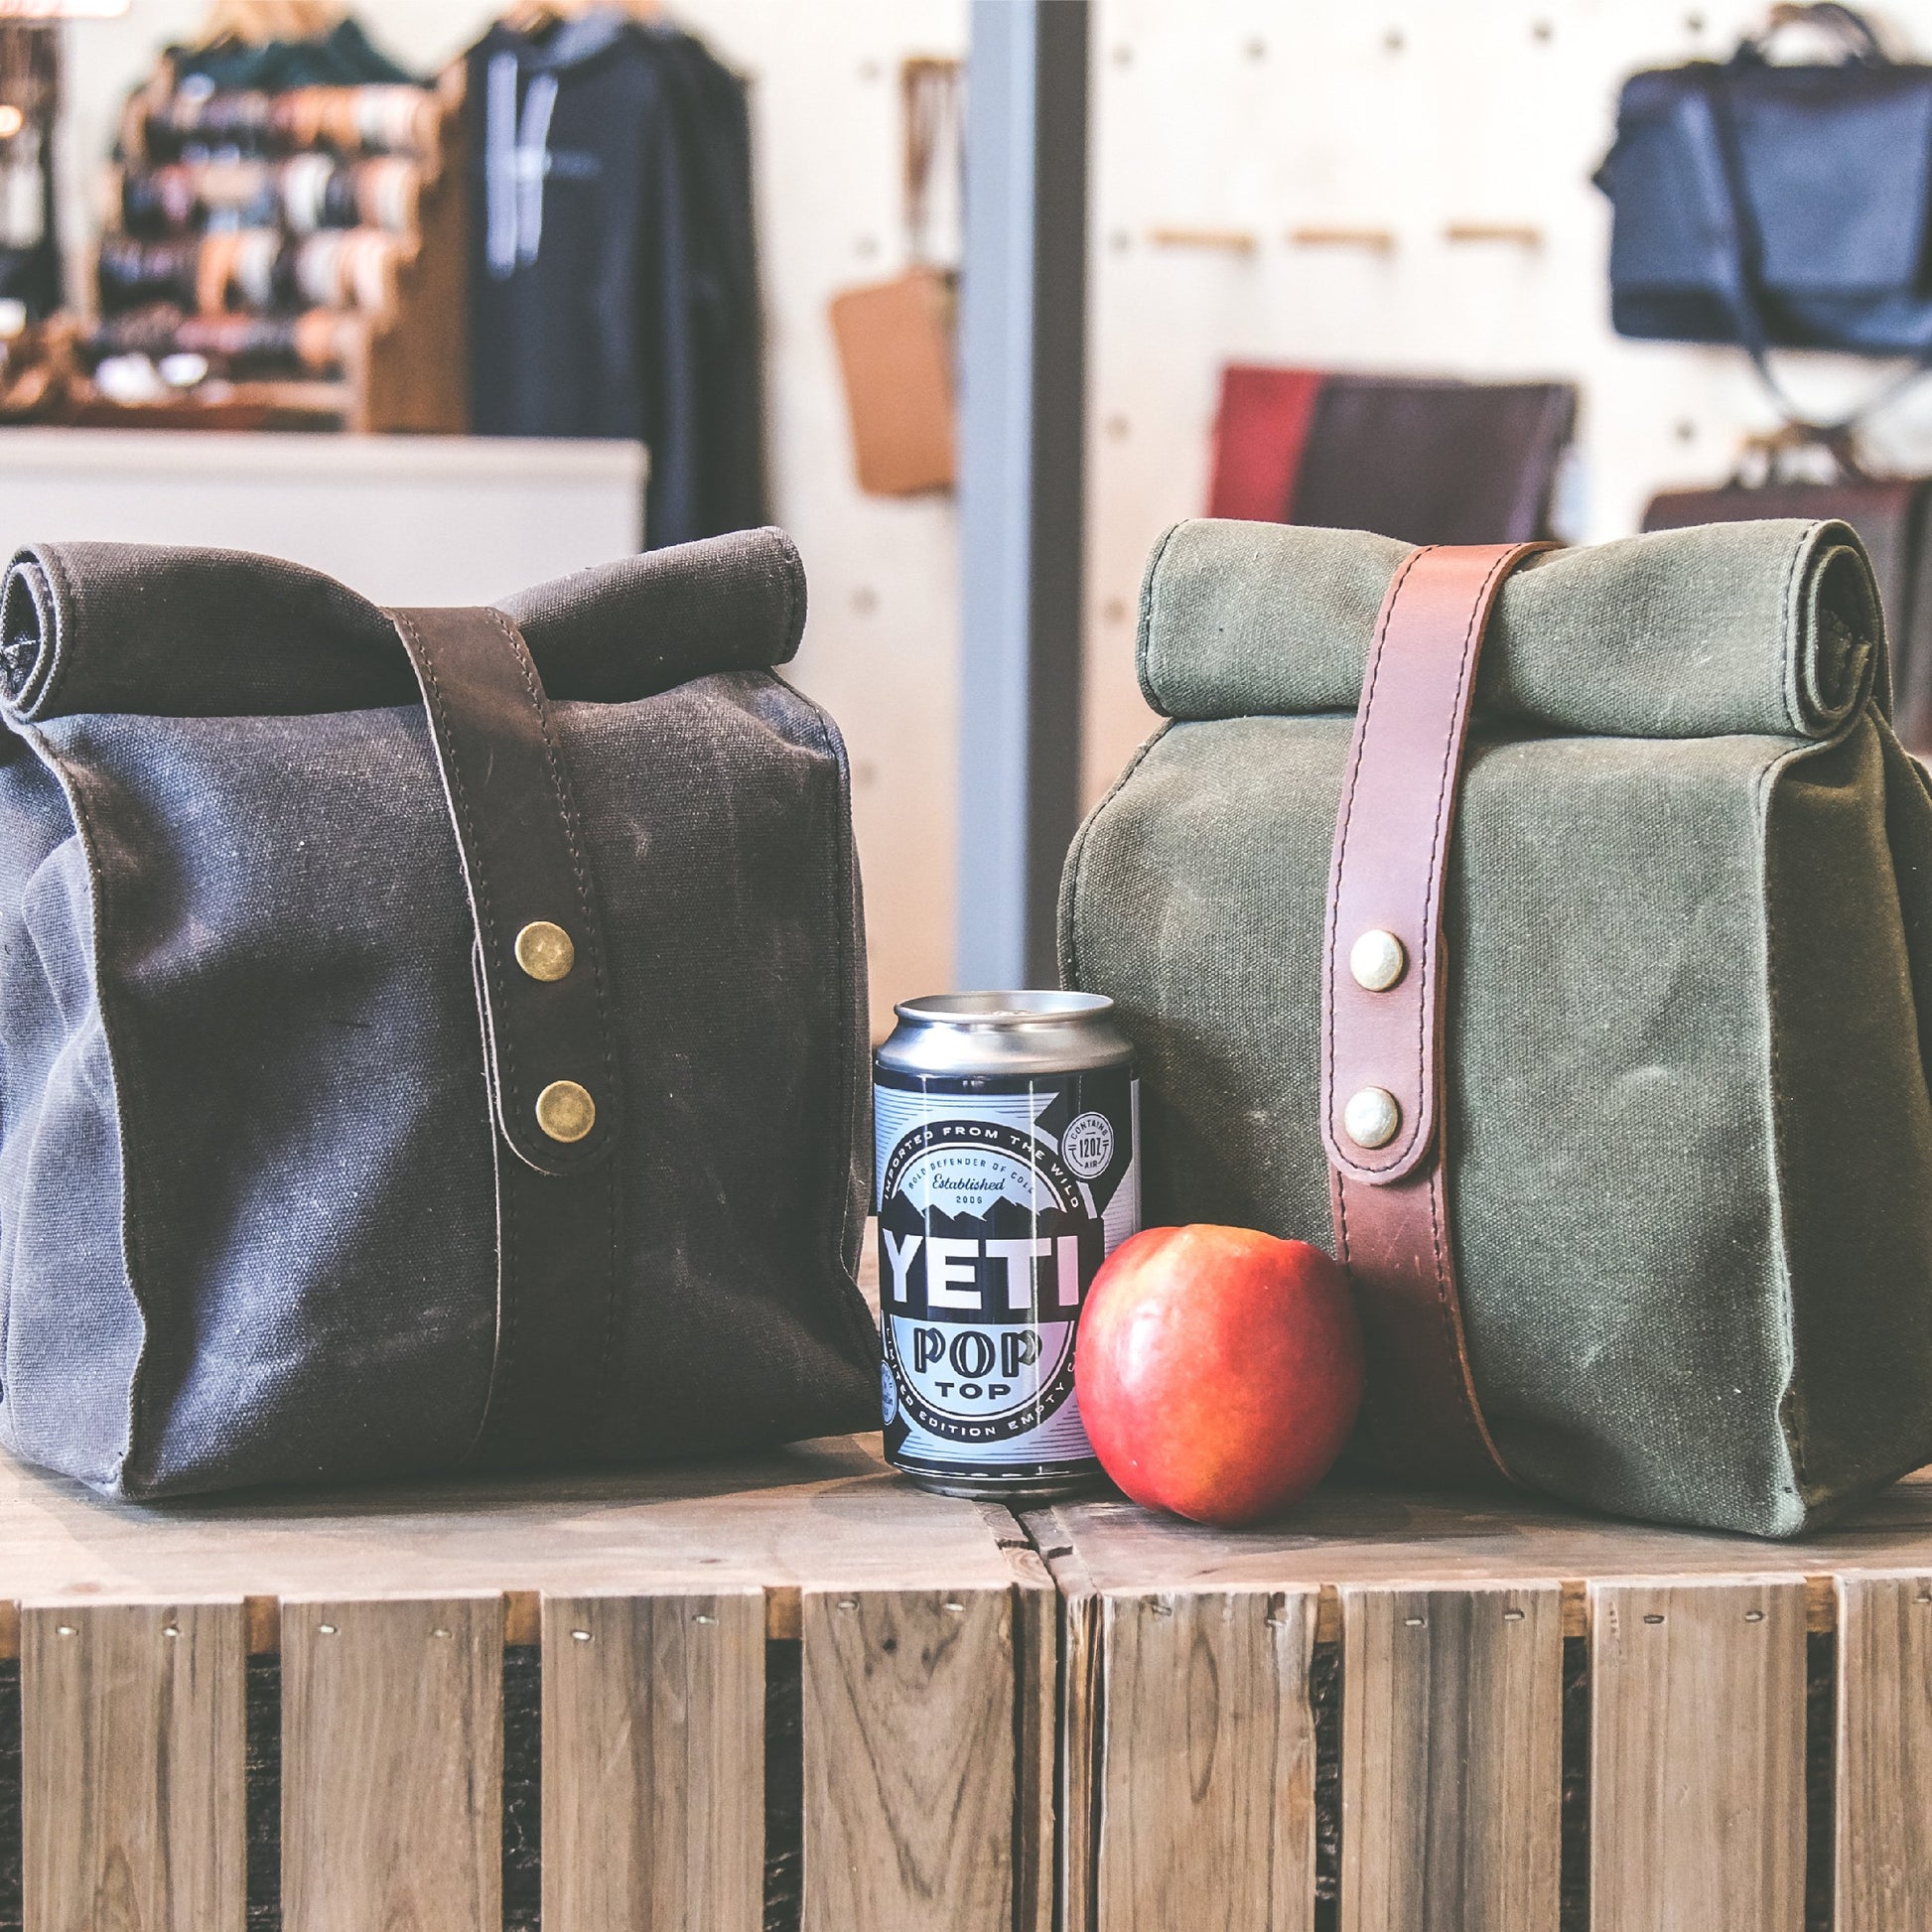 Black Canvas & Leather Fold Top Lunch Bag – Hold Supply Co